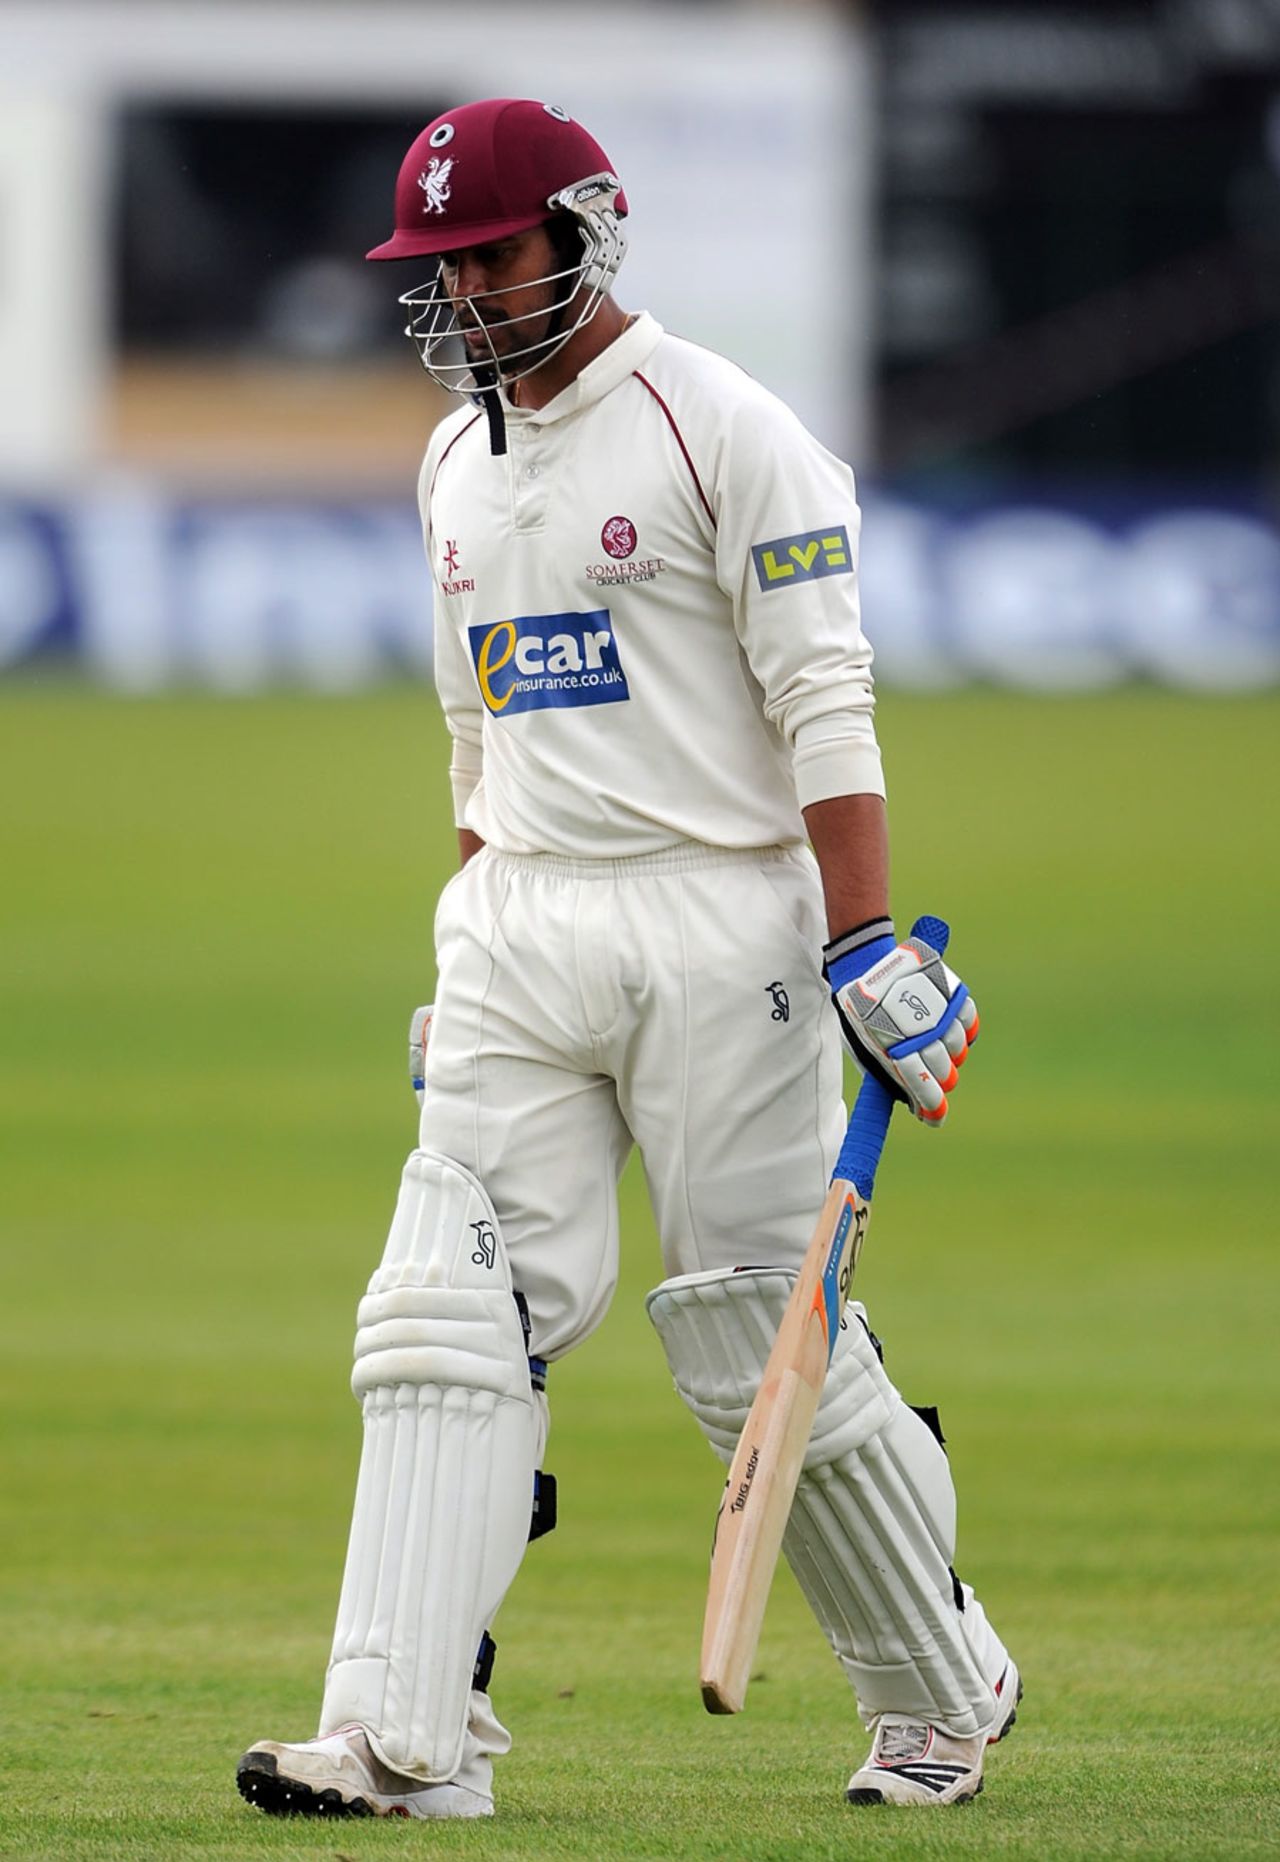 Arul Suppiah made a first-ball duck, Lancashire v Somerset, County Championship, Division One, Aigburth, 2nd day, August 2, 2012